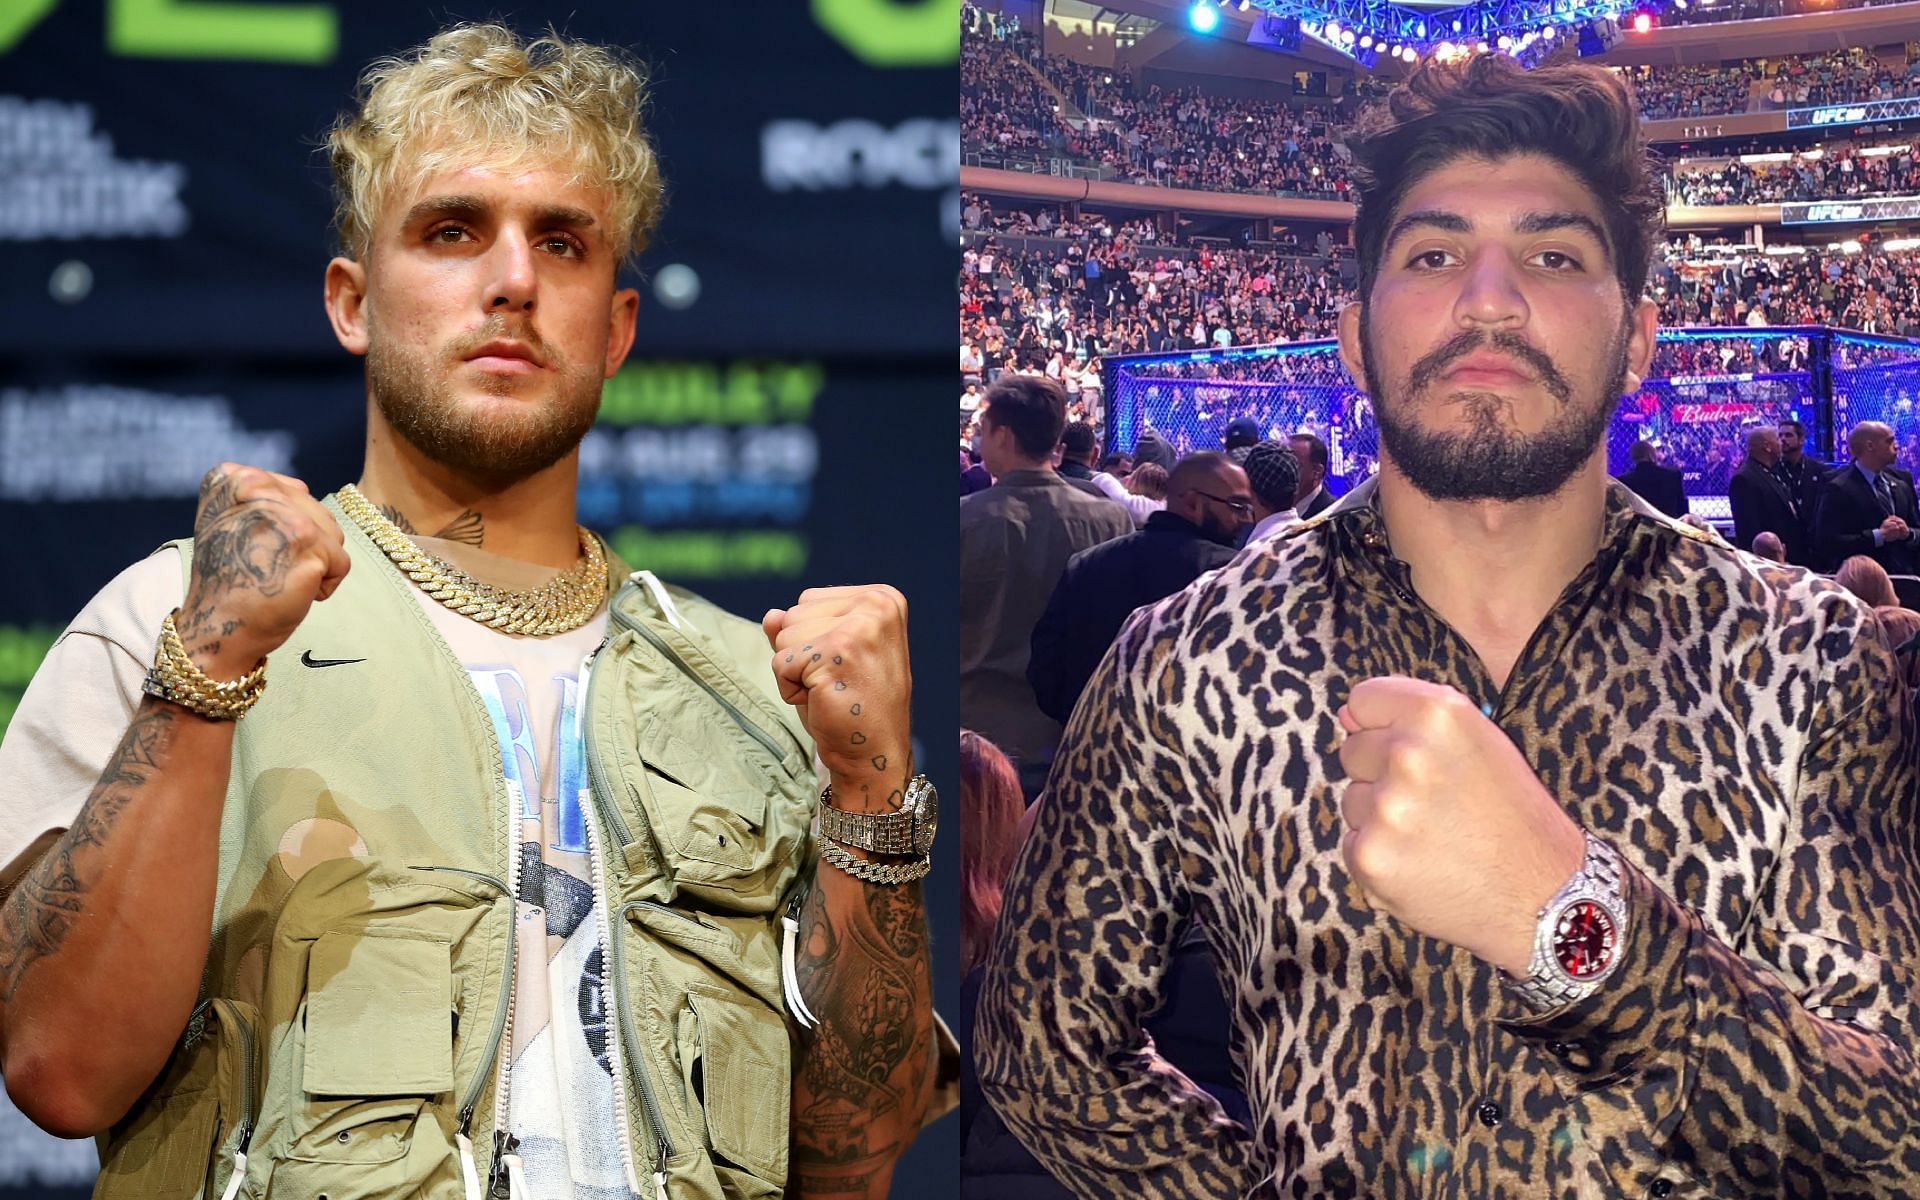 Jake Paul and Dillon Danis [Image credits: Getty Images and @dillondanis on Instagram]